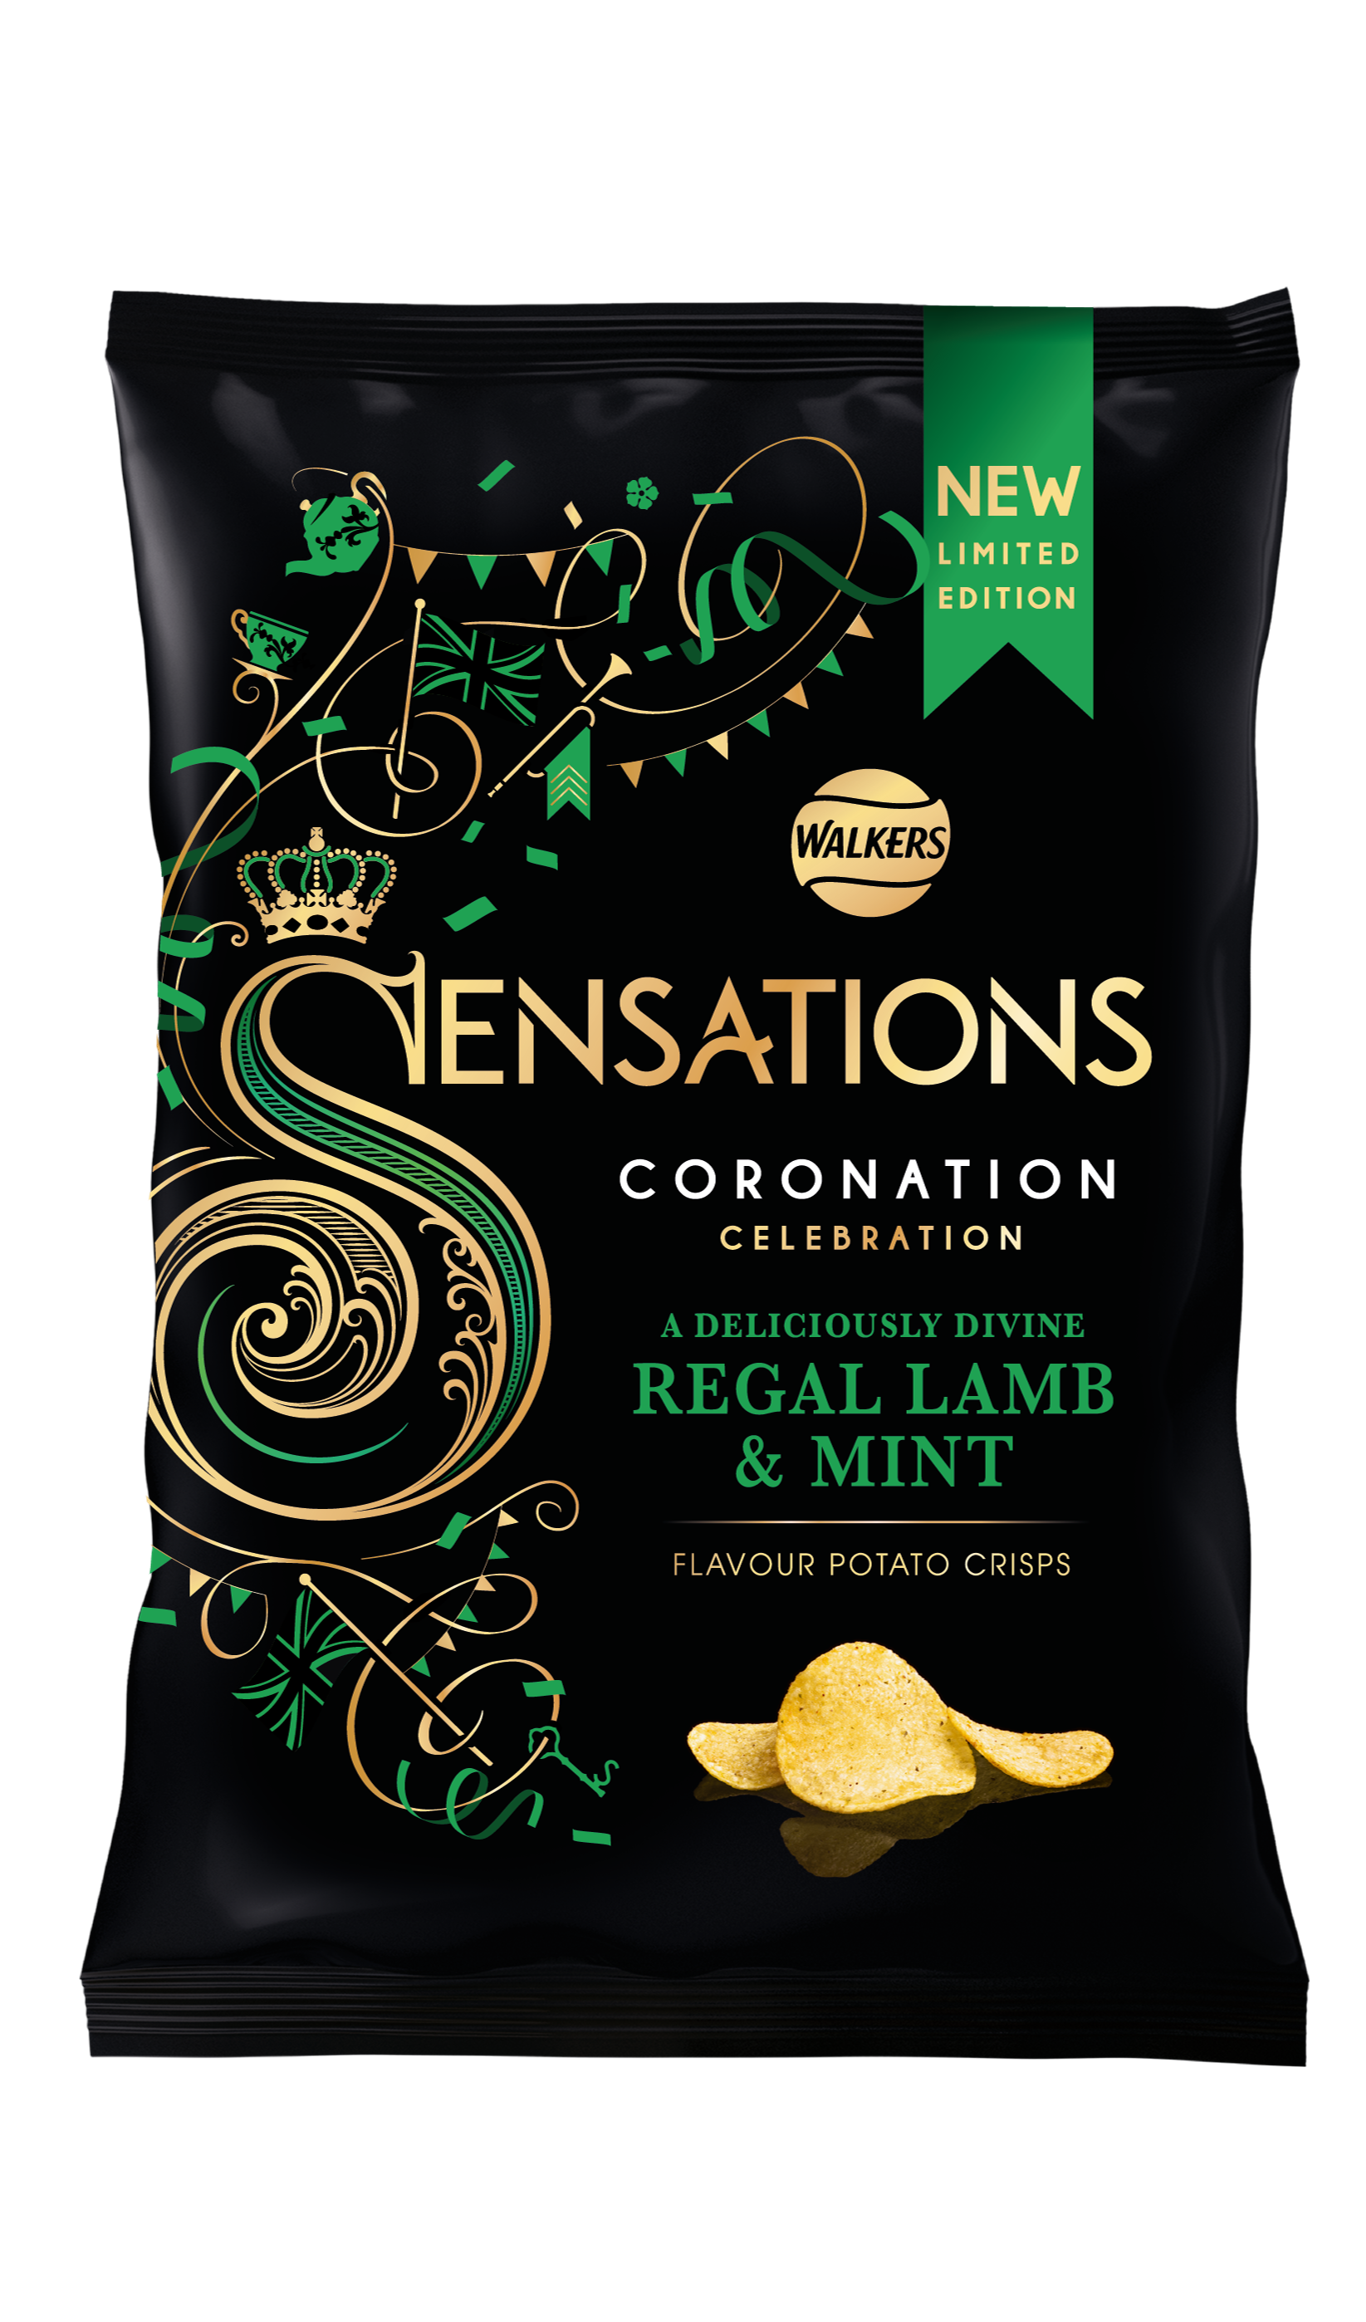 Sensations celebrates the Coronation with new limited-edition flavours